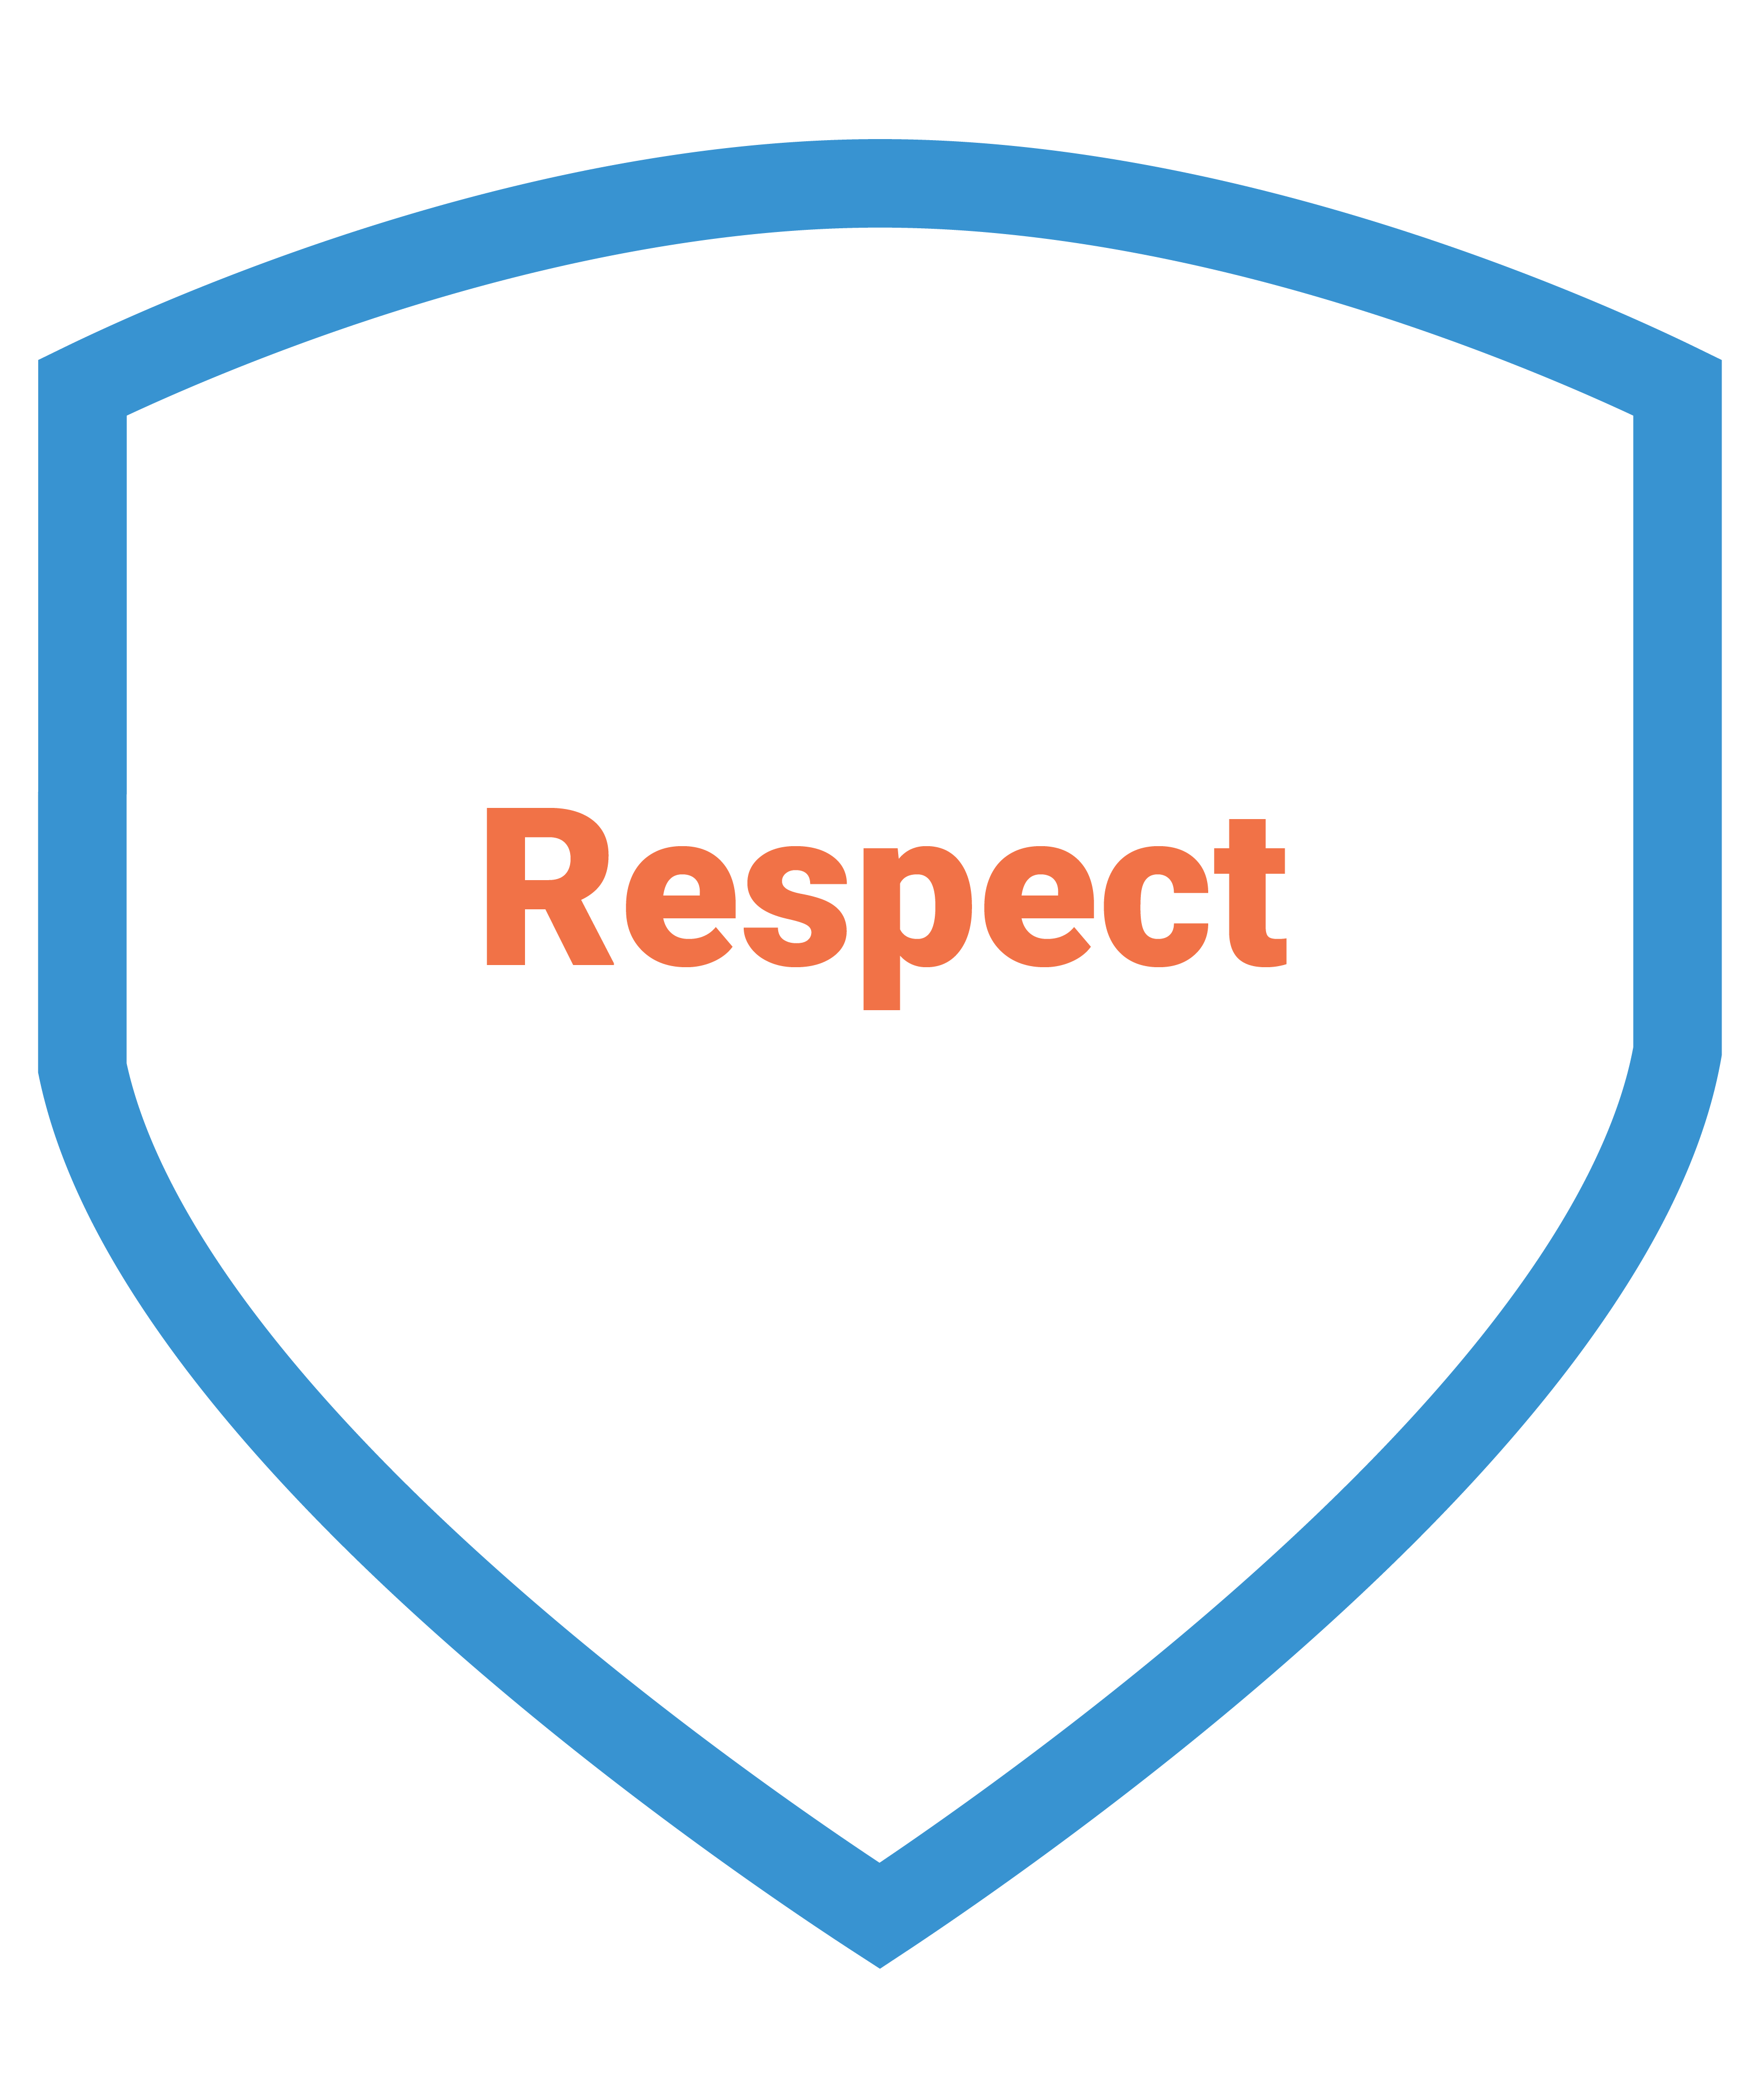 About the company - Our values - The word "Respect" in orange text surrounded by a blue shield outline.